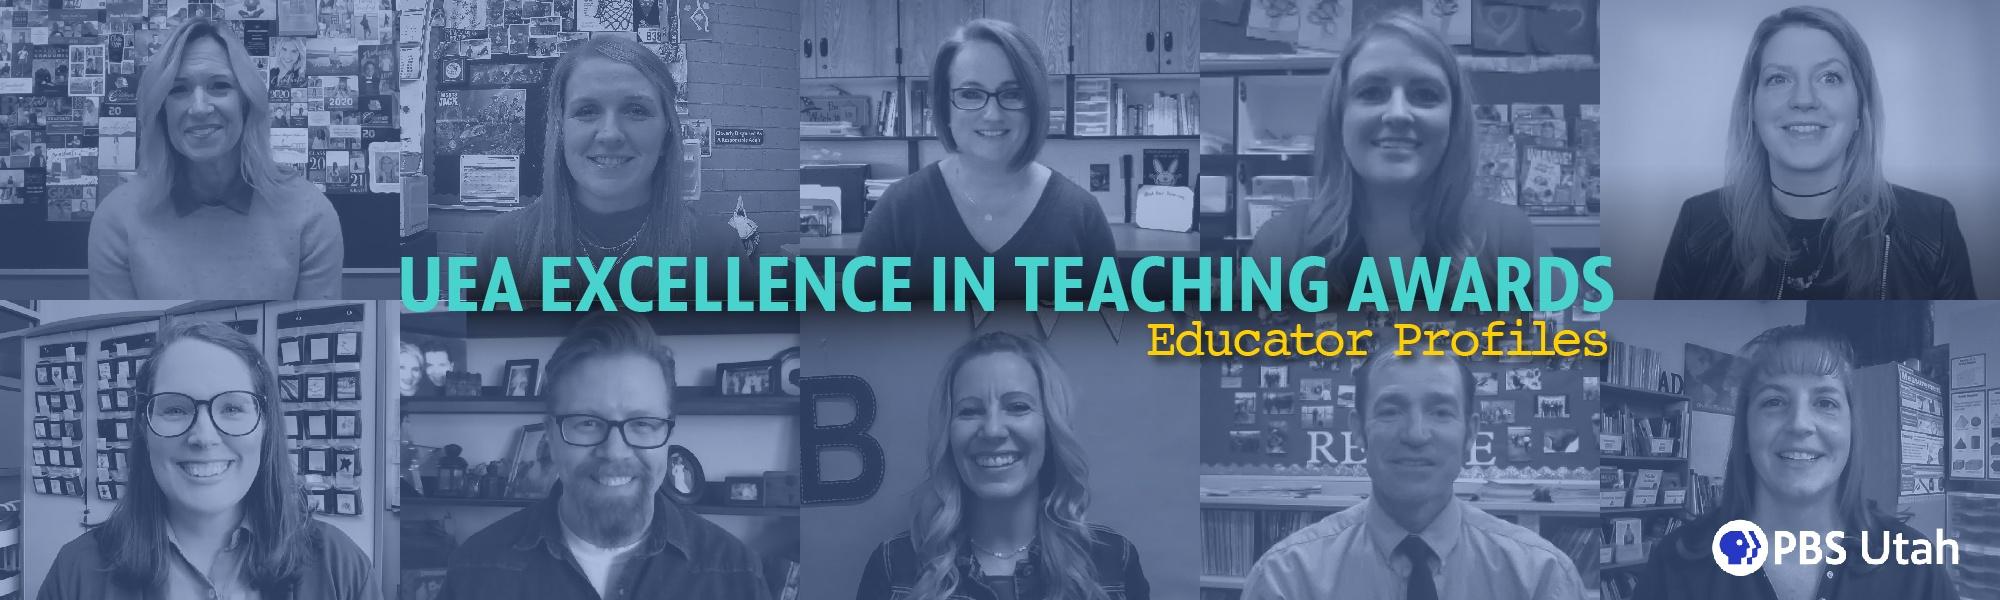 UEA Excellence in Teaching Awards - Educator Profiles 2022